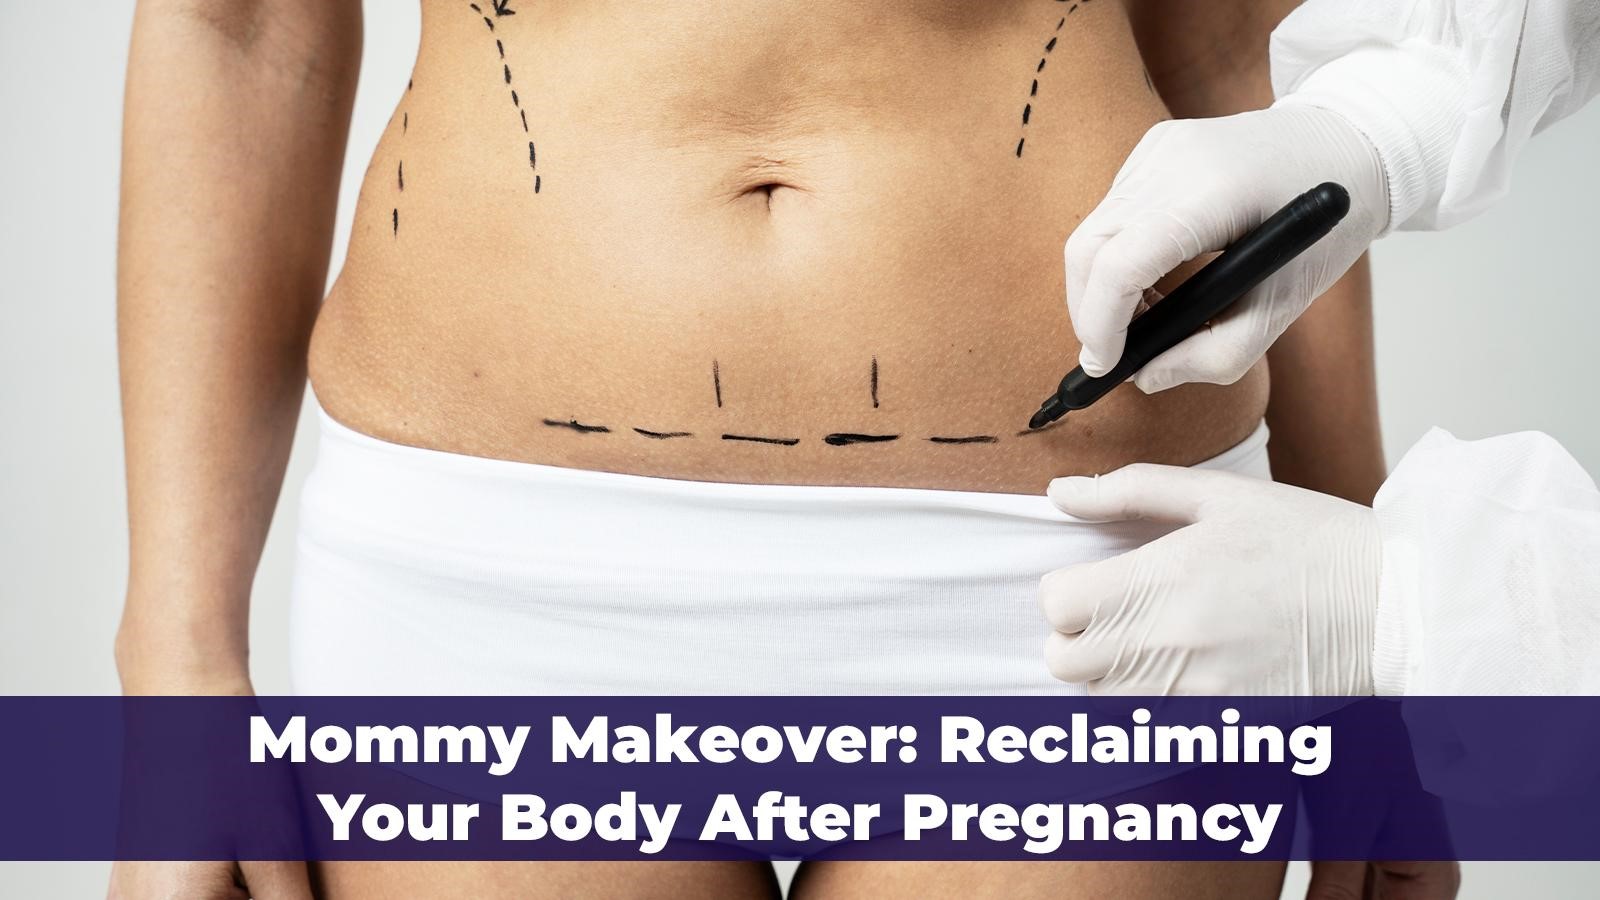 Reclaim your body after pregnancy with a mommy makeover, a transformative journey tailored to restore your confidence and vitality. Trust Sedat Tatar.